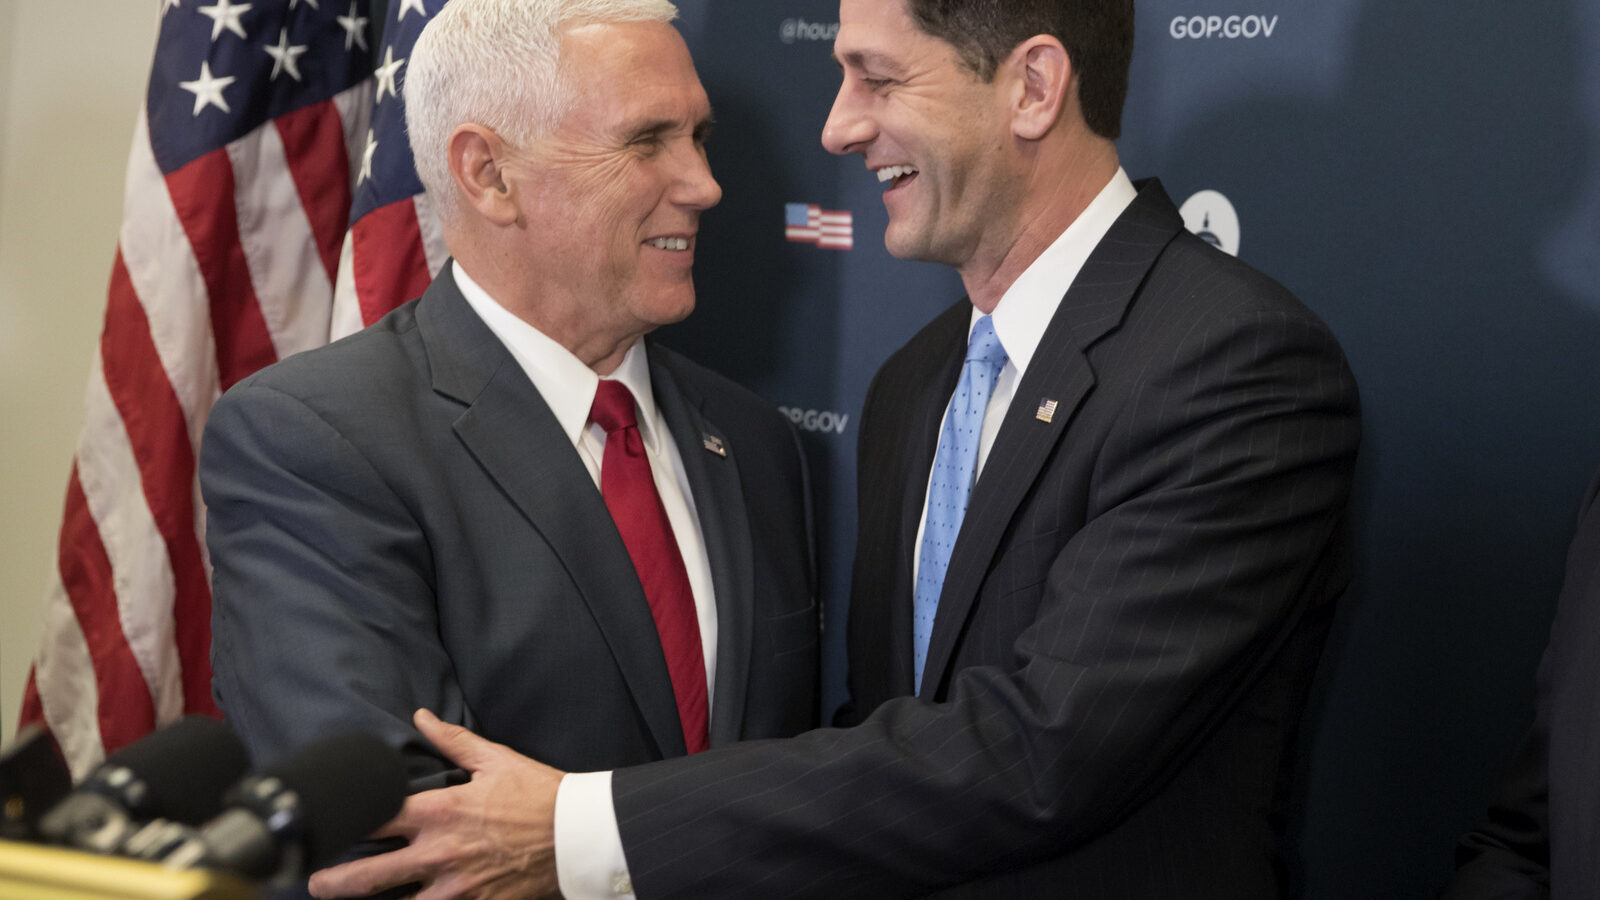 Vice President-elect Mike Pence is welcomed at a news conference on Capitol Hill in Washington, Wednesday, Jan. 4, 2017, by House Speaker Paul Ryan of Wis. following a closed-door meeting with the GOP caucus. (AP/J. Scott Applewhite)